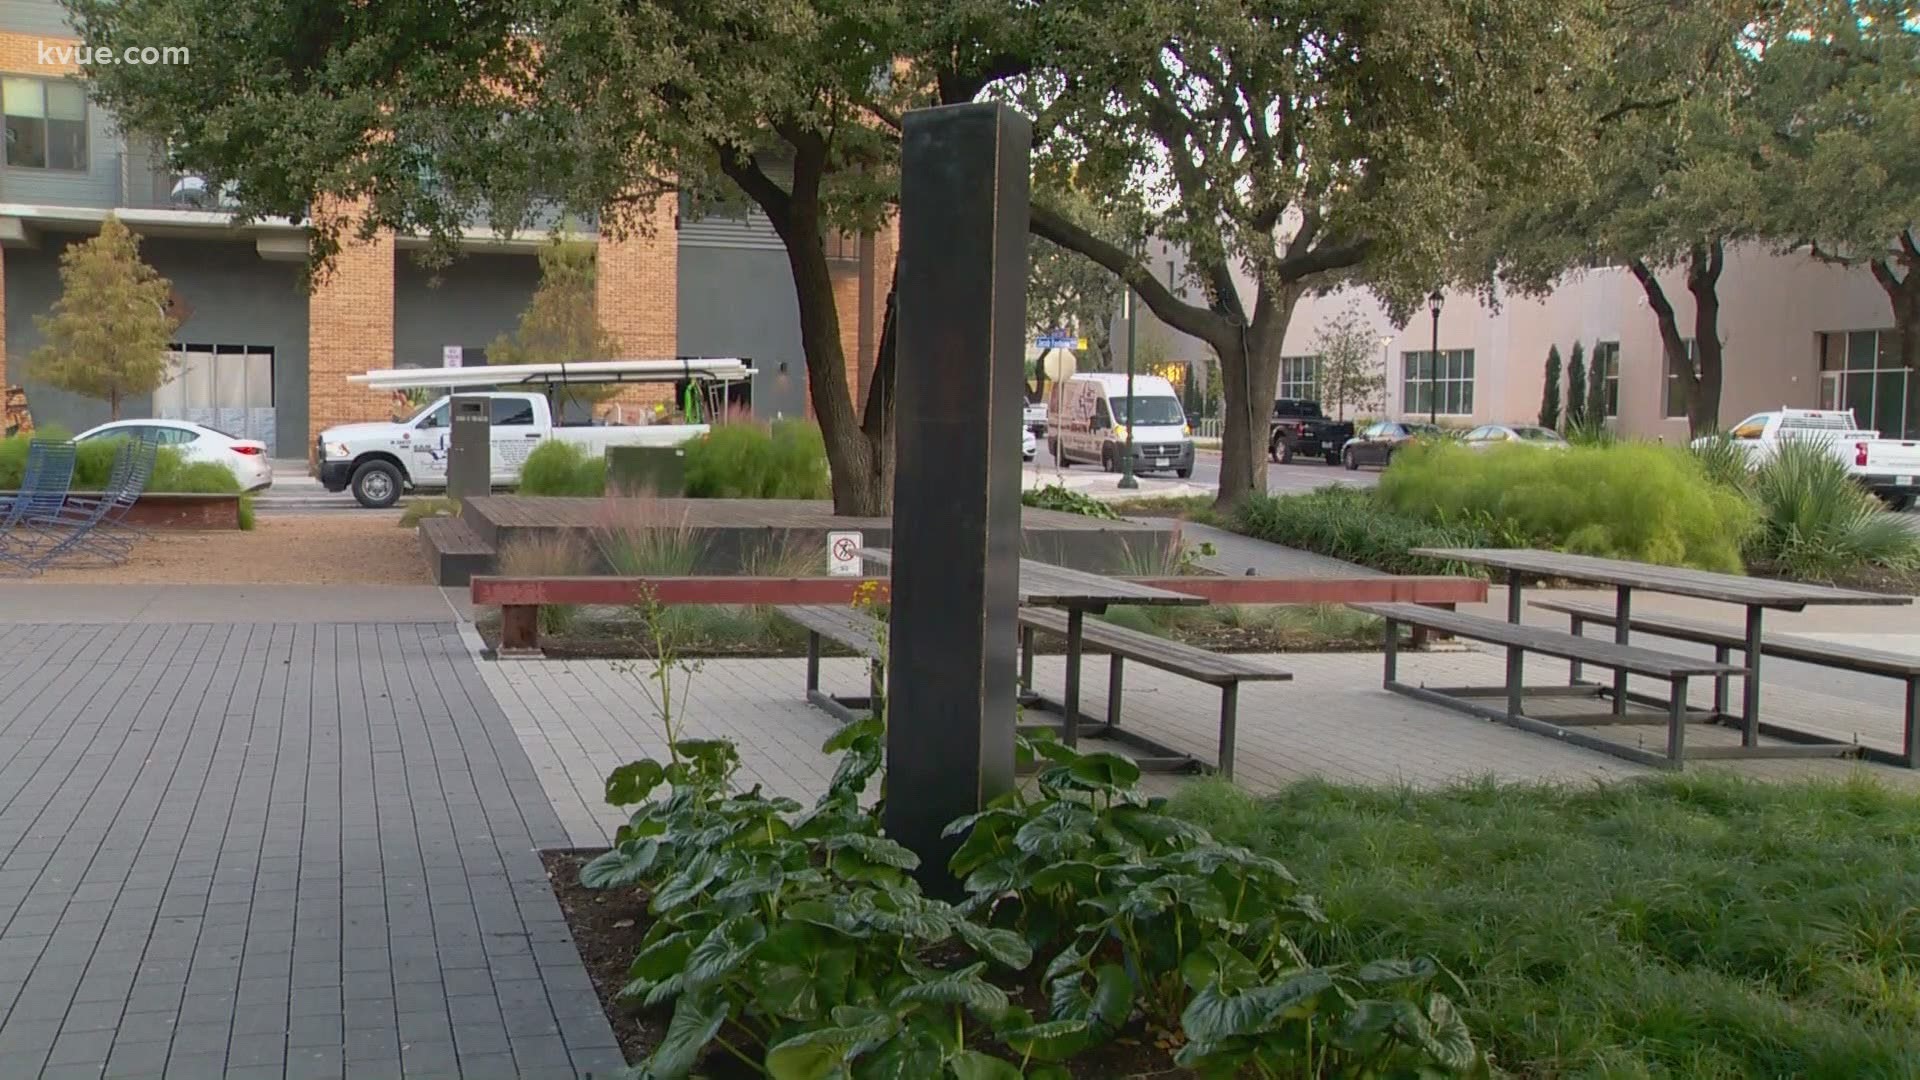 The welding department at Austin Community College installed a monolith at the Jacob Fontaine Plaza on ACC's Highland campus.